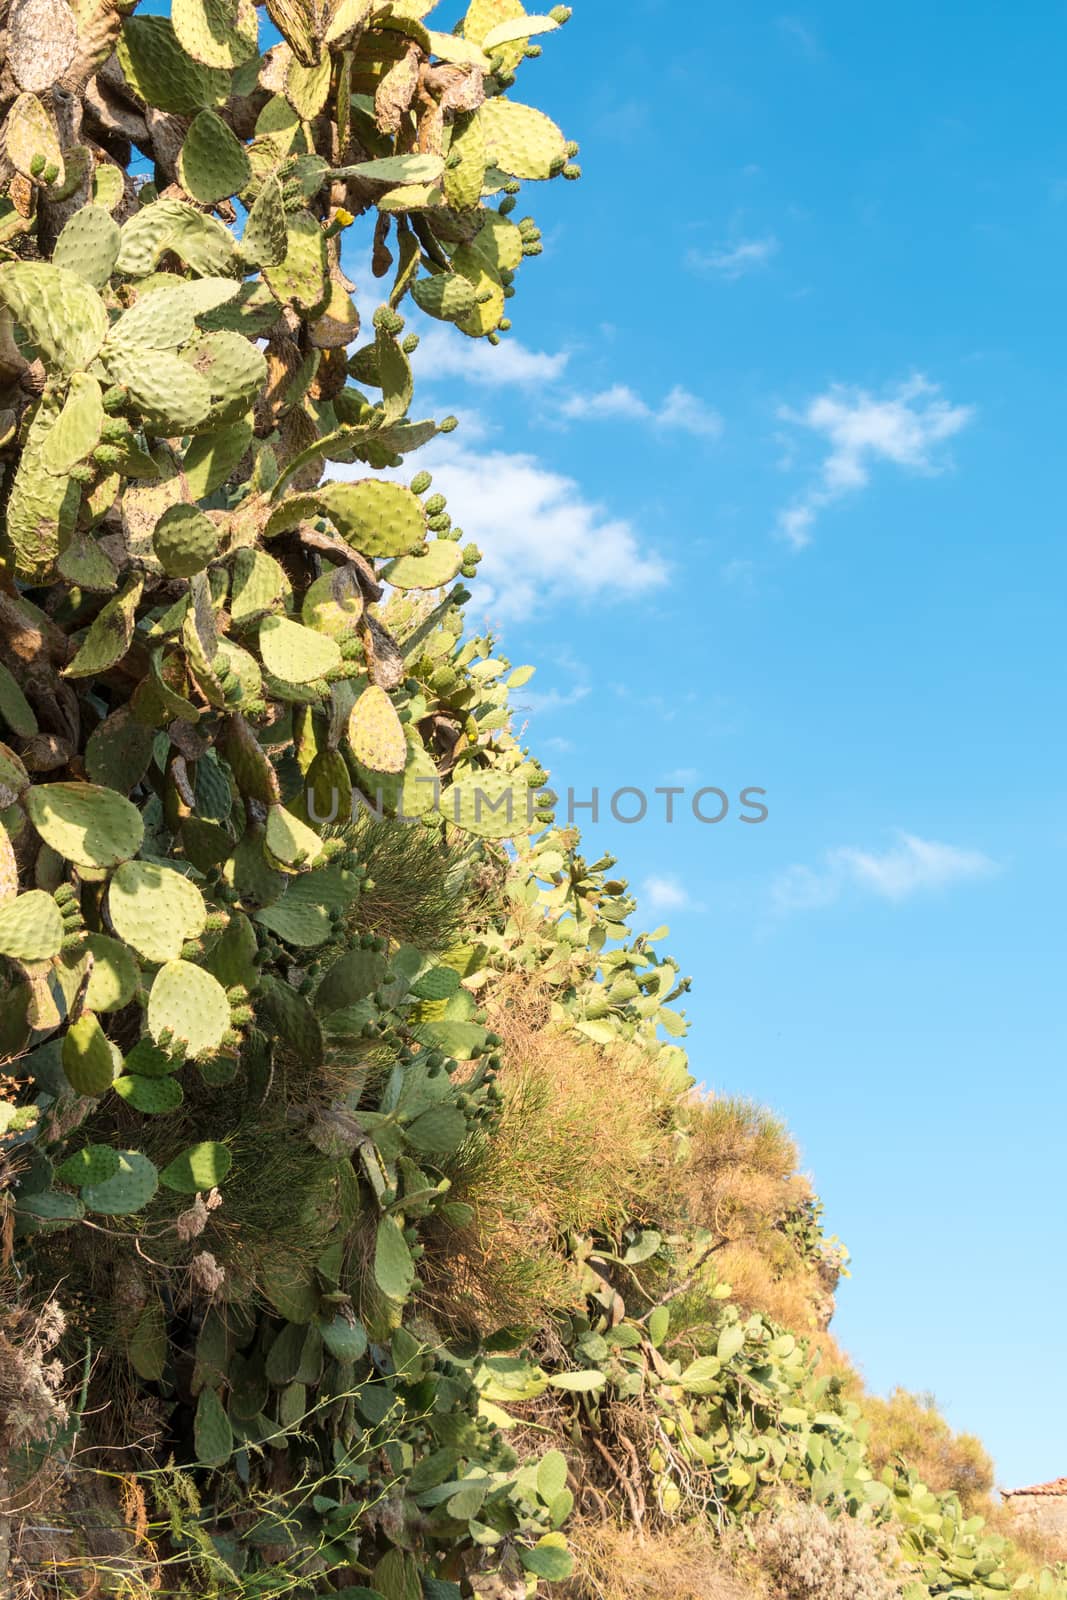 Prickly Pear on a green plants with thorns